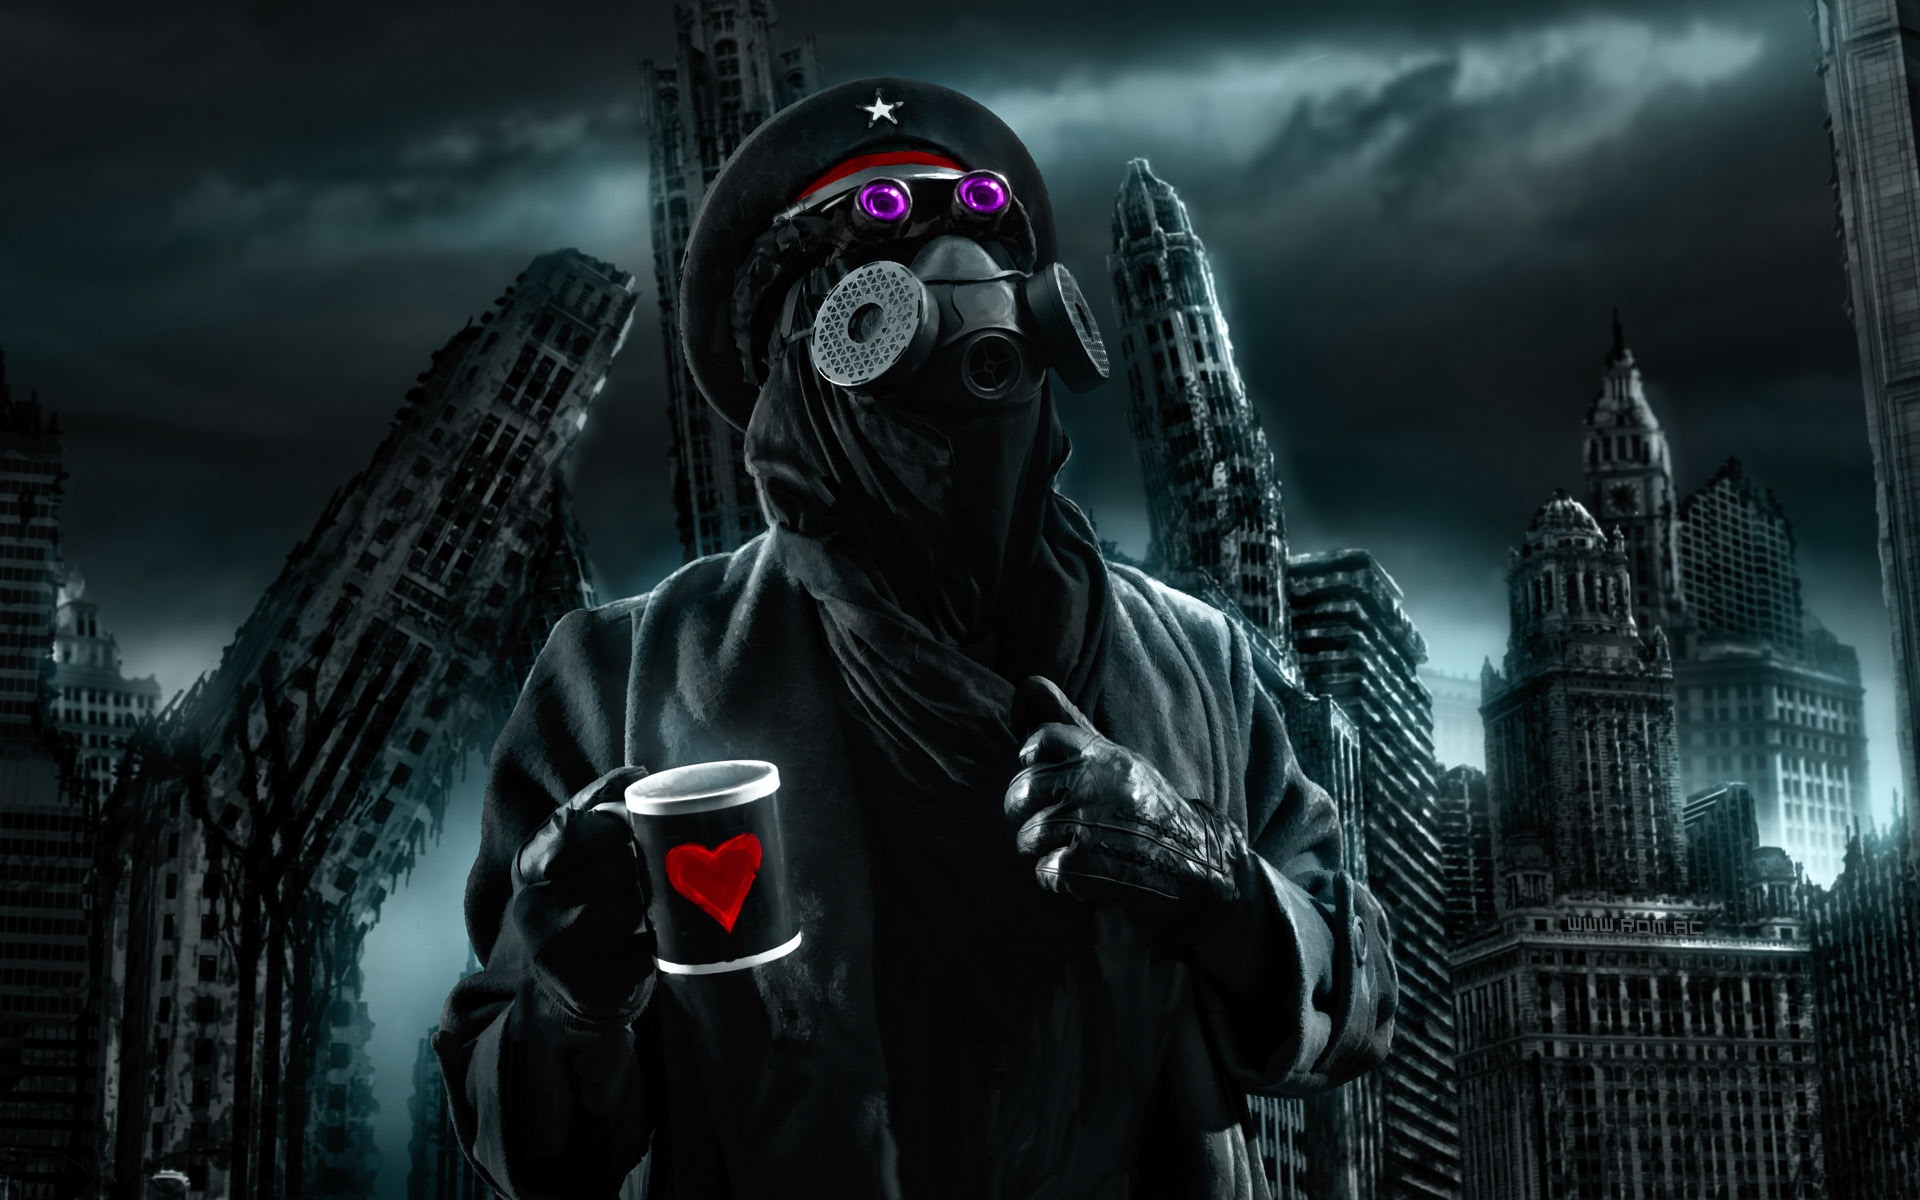 Romantically Apocalyptic creative painting wallpapers (2) #15 - 1920x1200